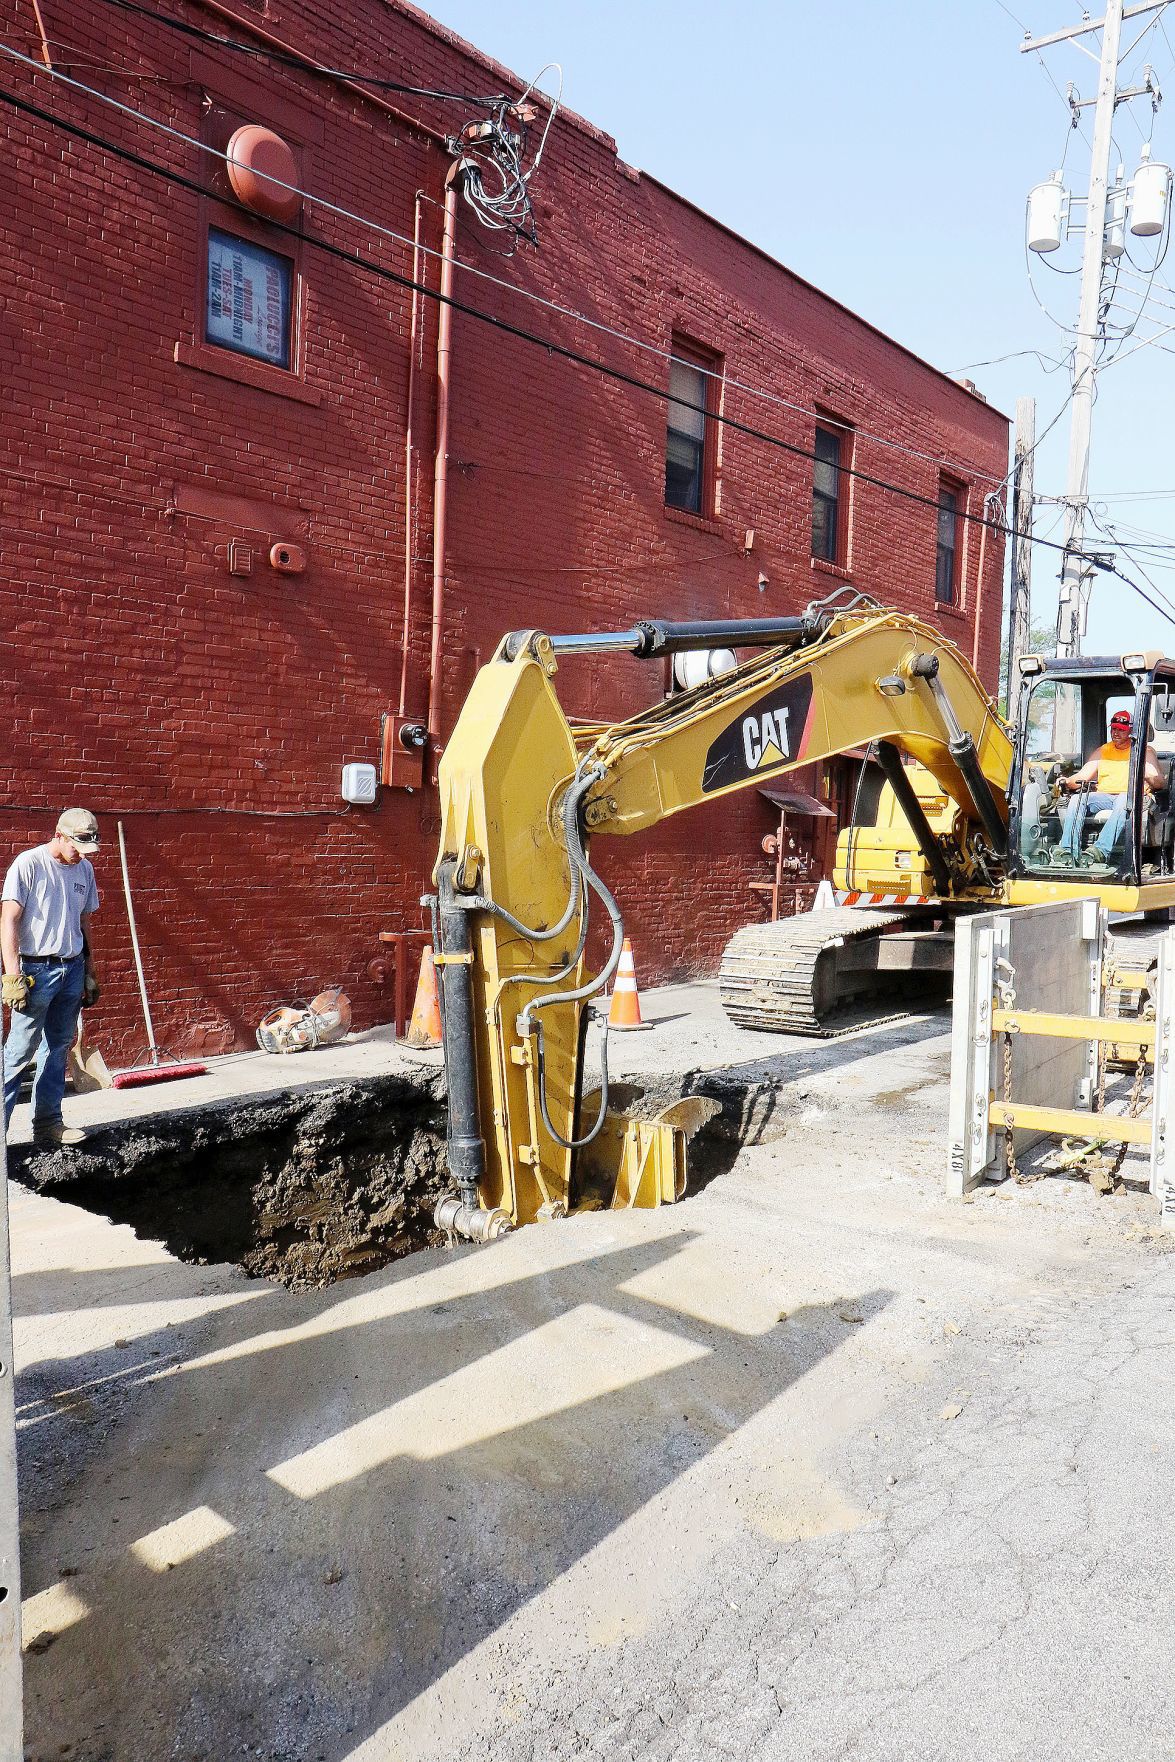 Sinkhole Fix On The Way Local News Atchisonglobenow Com